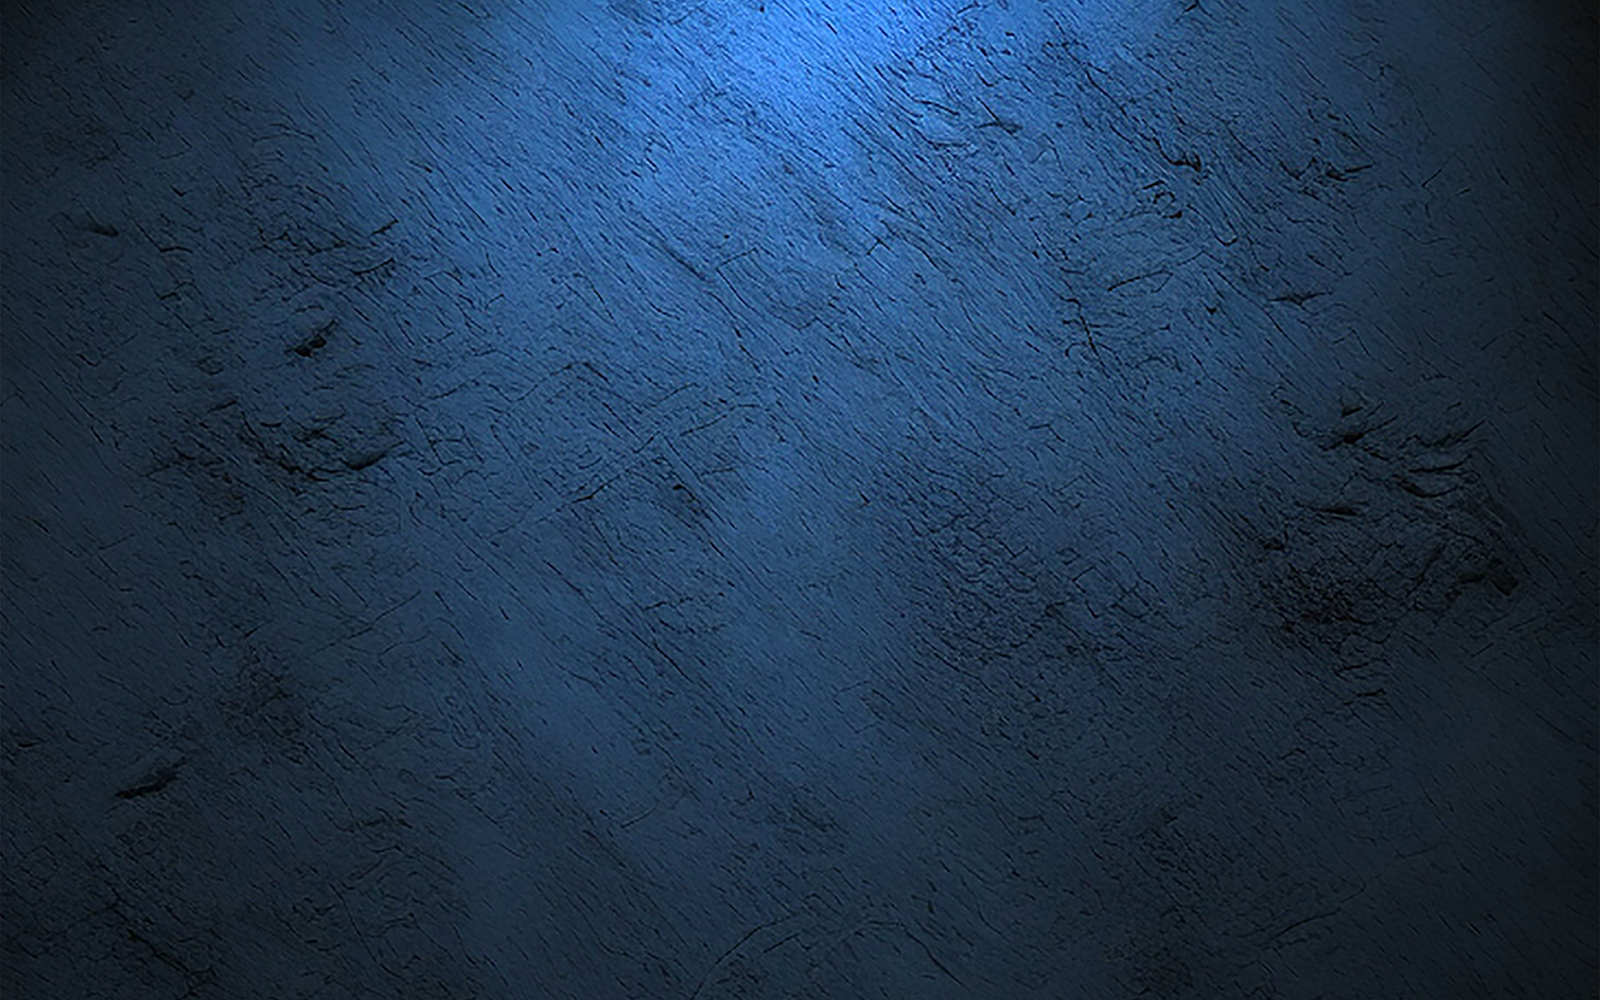 Blue wall background_abstract navyblue textured wall background_Blue textured wall pattern